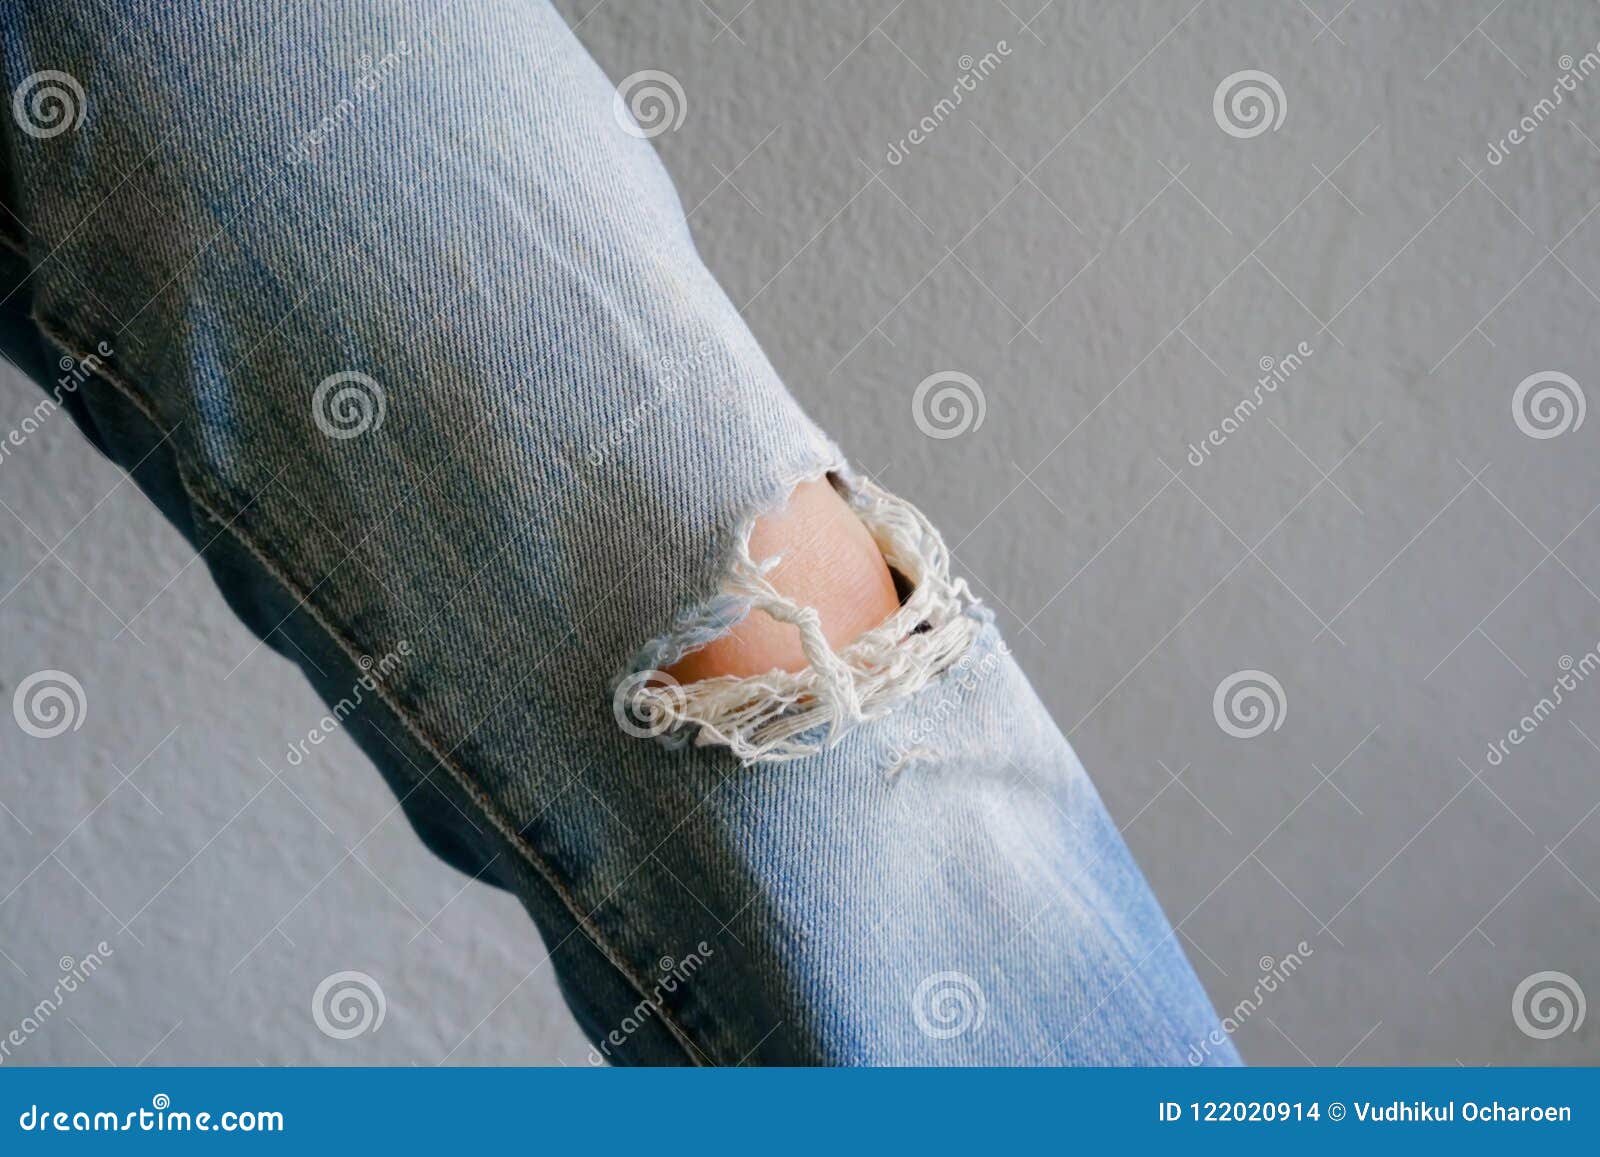 Woman Leg Wearing Jeans Torn Denim Against White Wall Background Stock ...